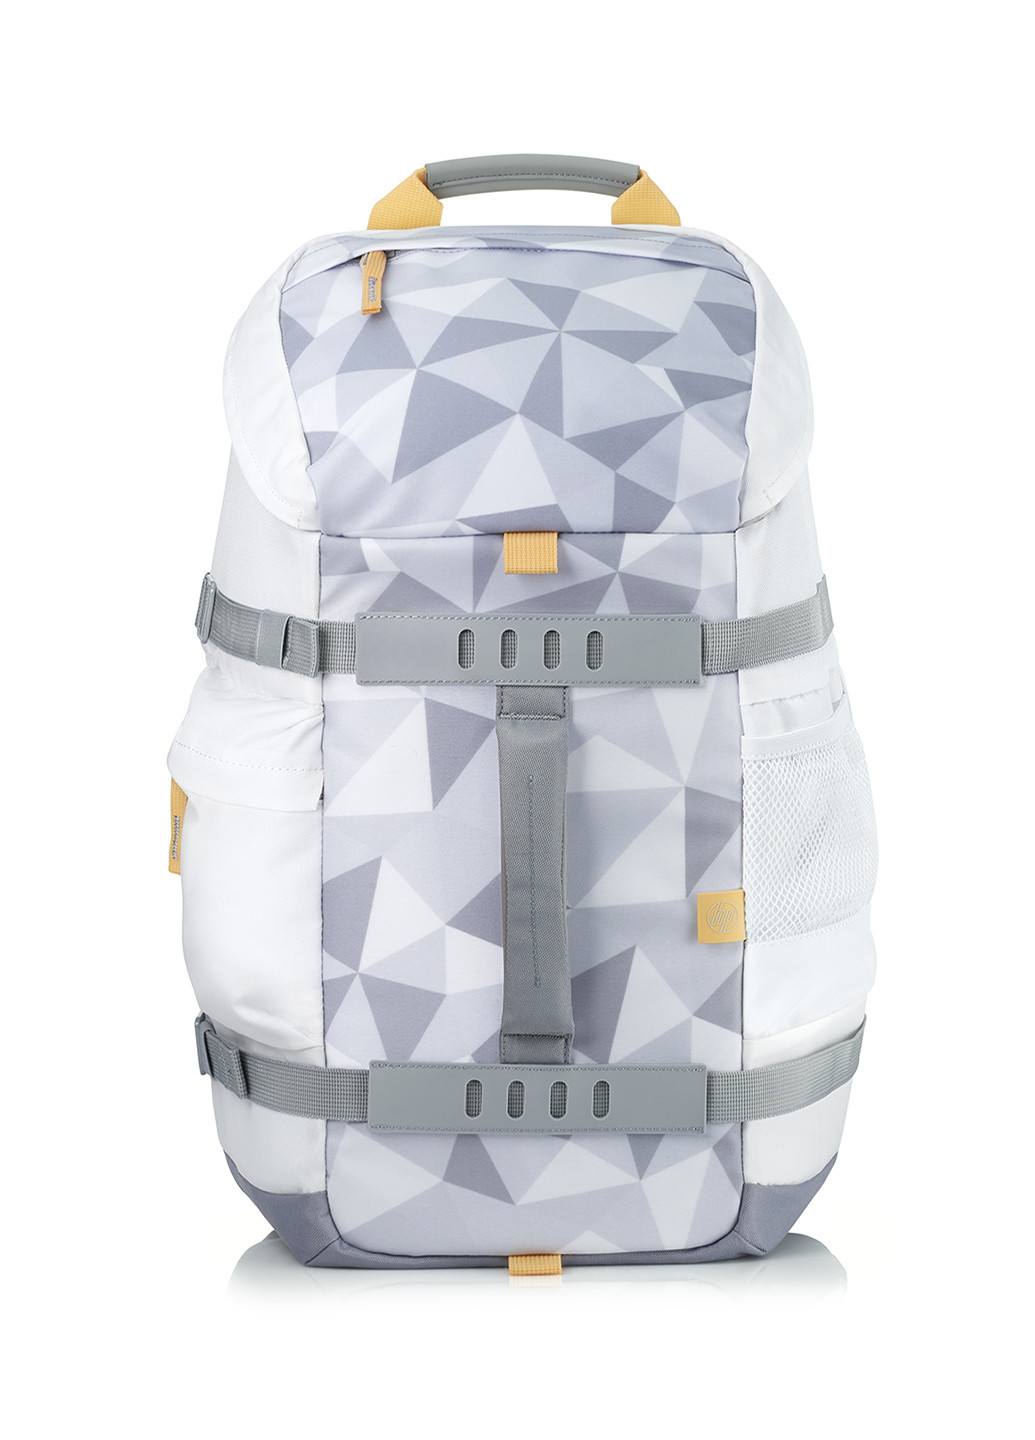 Рюкзак Odyssey 15.6 Backpack Facet White HP hp 15.6 odyssey facet backpack white (161292278)